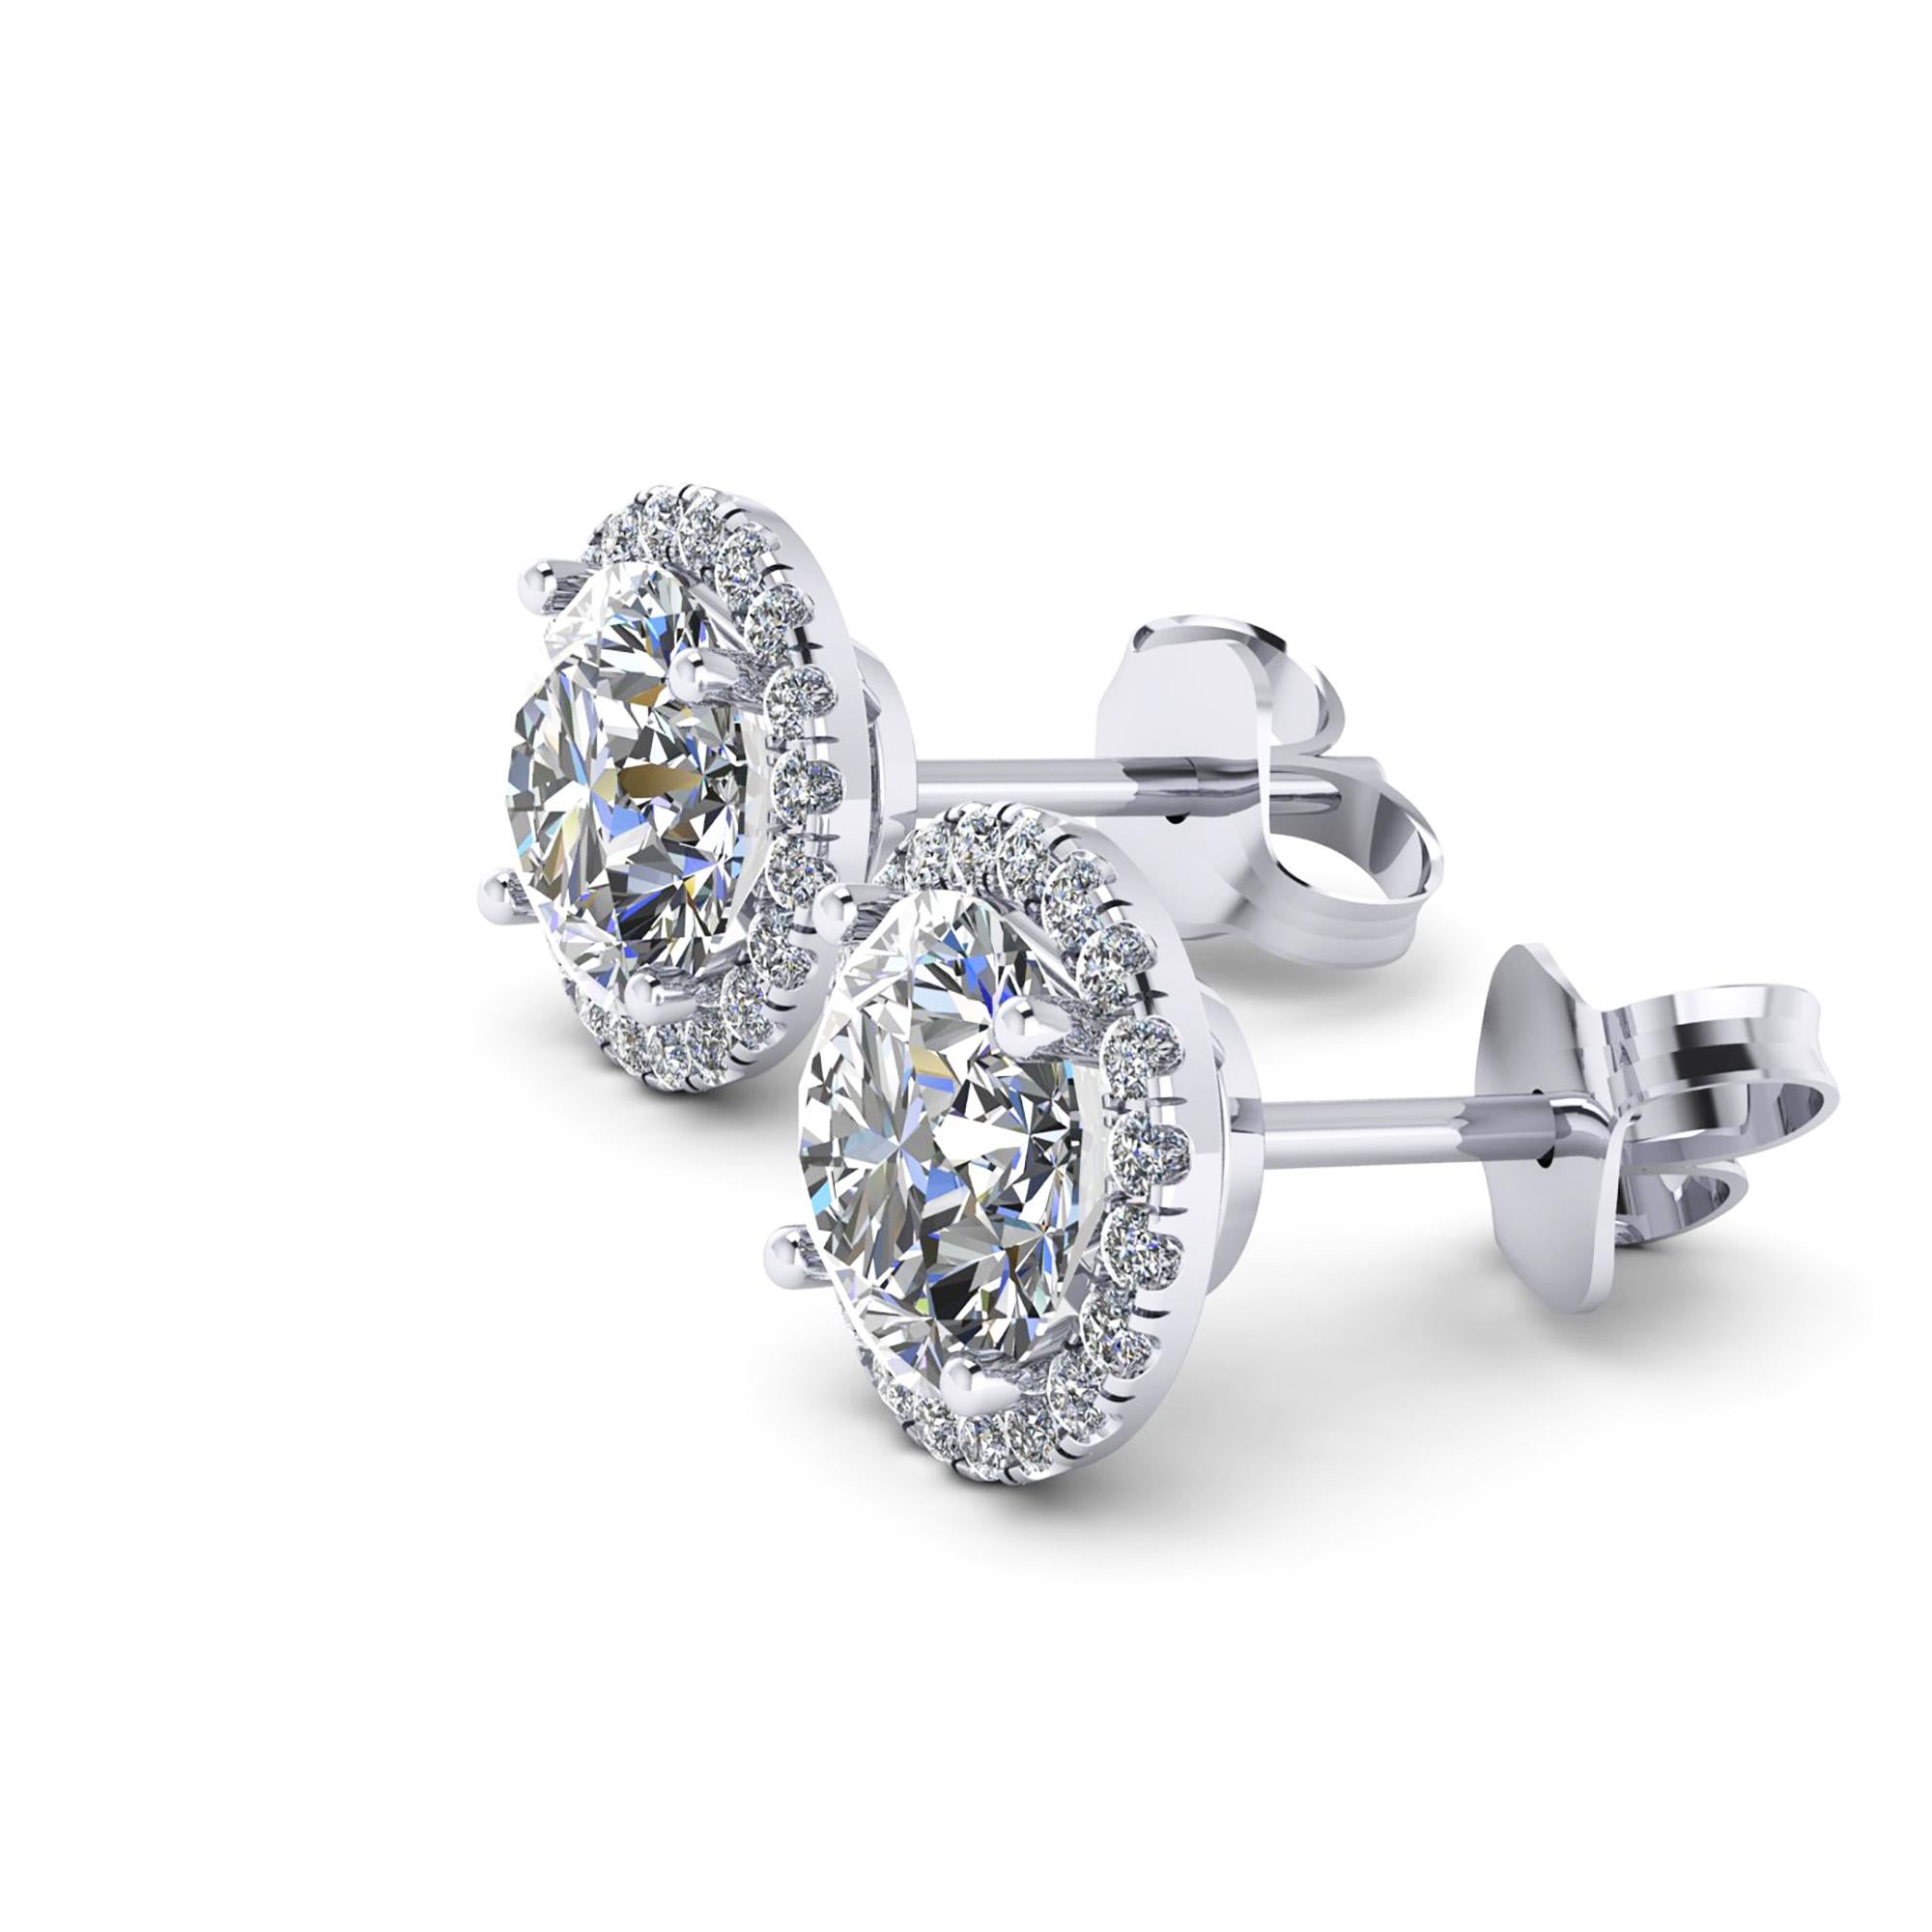 GIA Certified 2.27 Carat Diamond Halo Studs earrings hand made in Platinum, with Screw-Back post,
two brilliant round diamonds, D color, VS2 clarity of 1.01 carat and 1.00 carat, GIA Certificate will accompany the earrings, with diamond halos